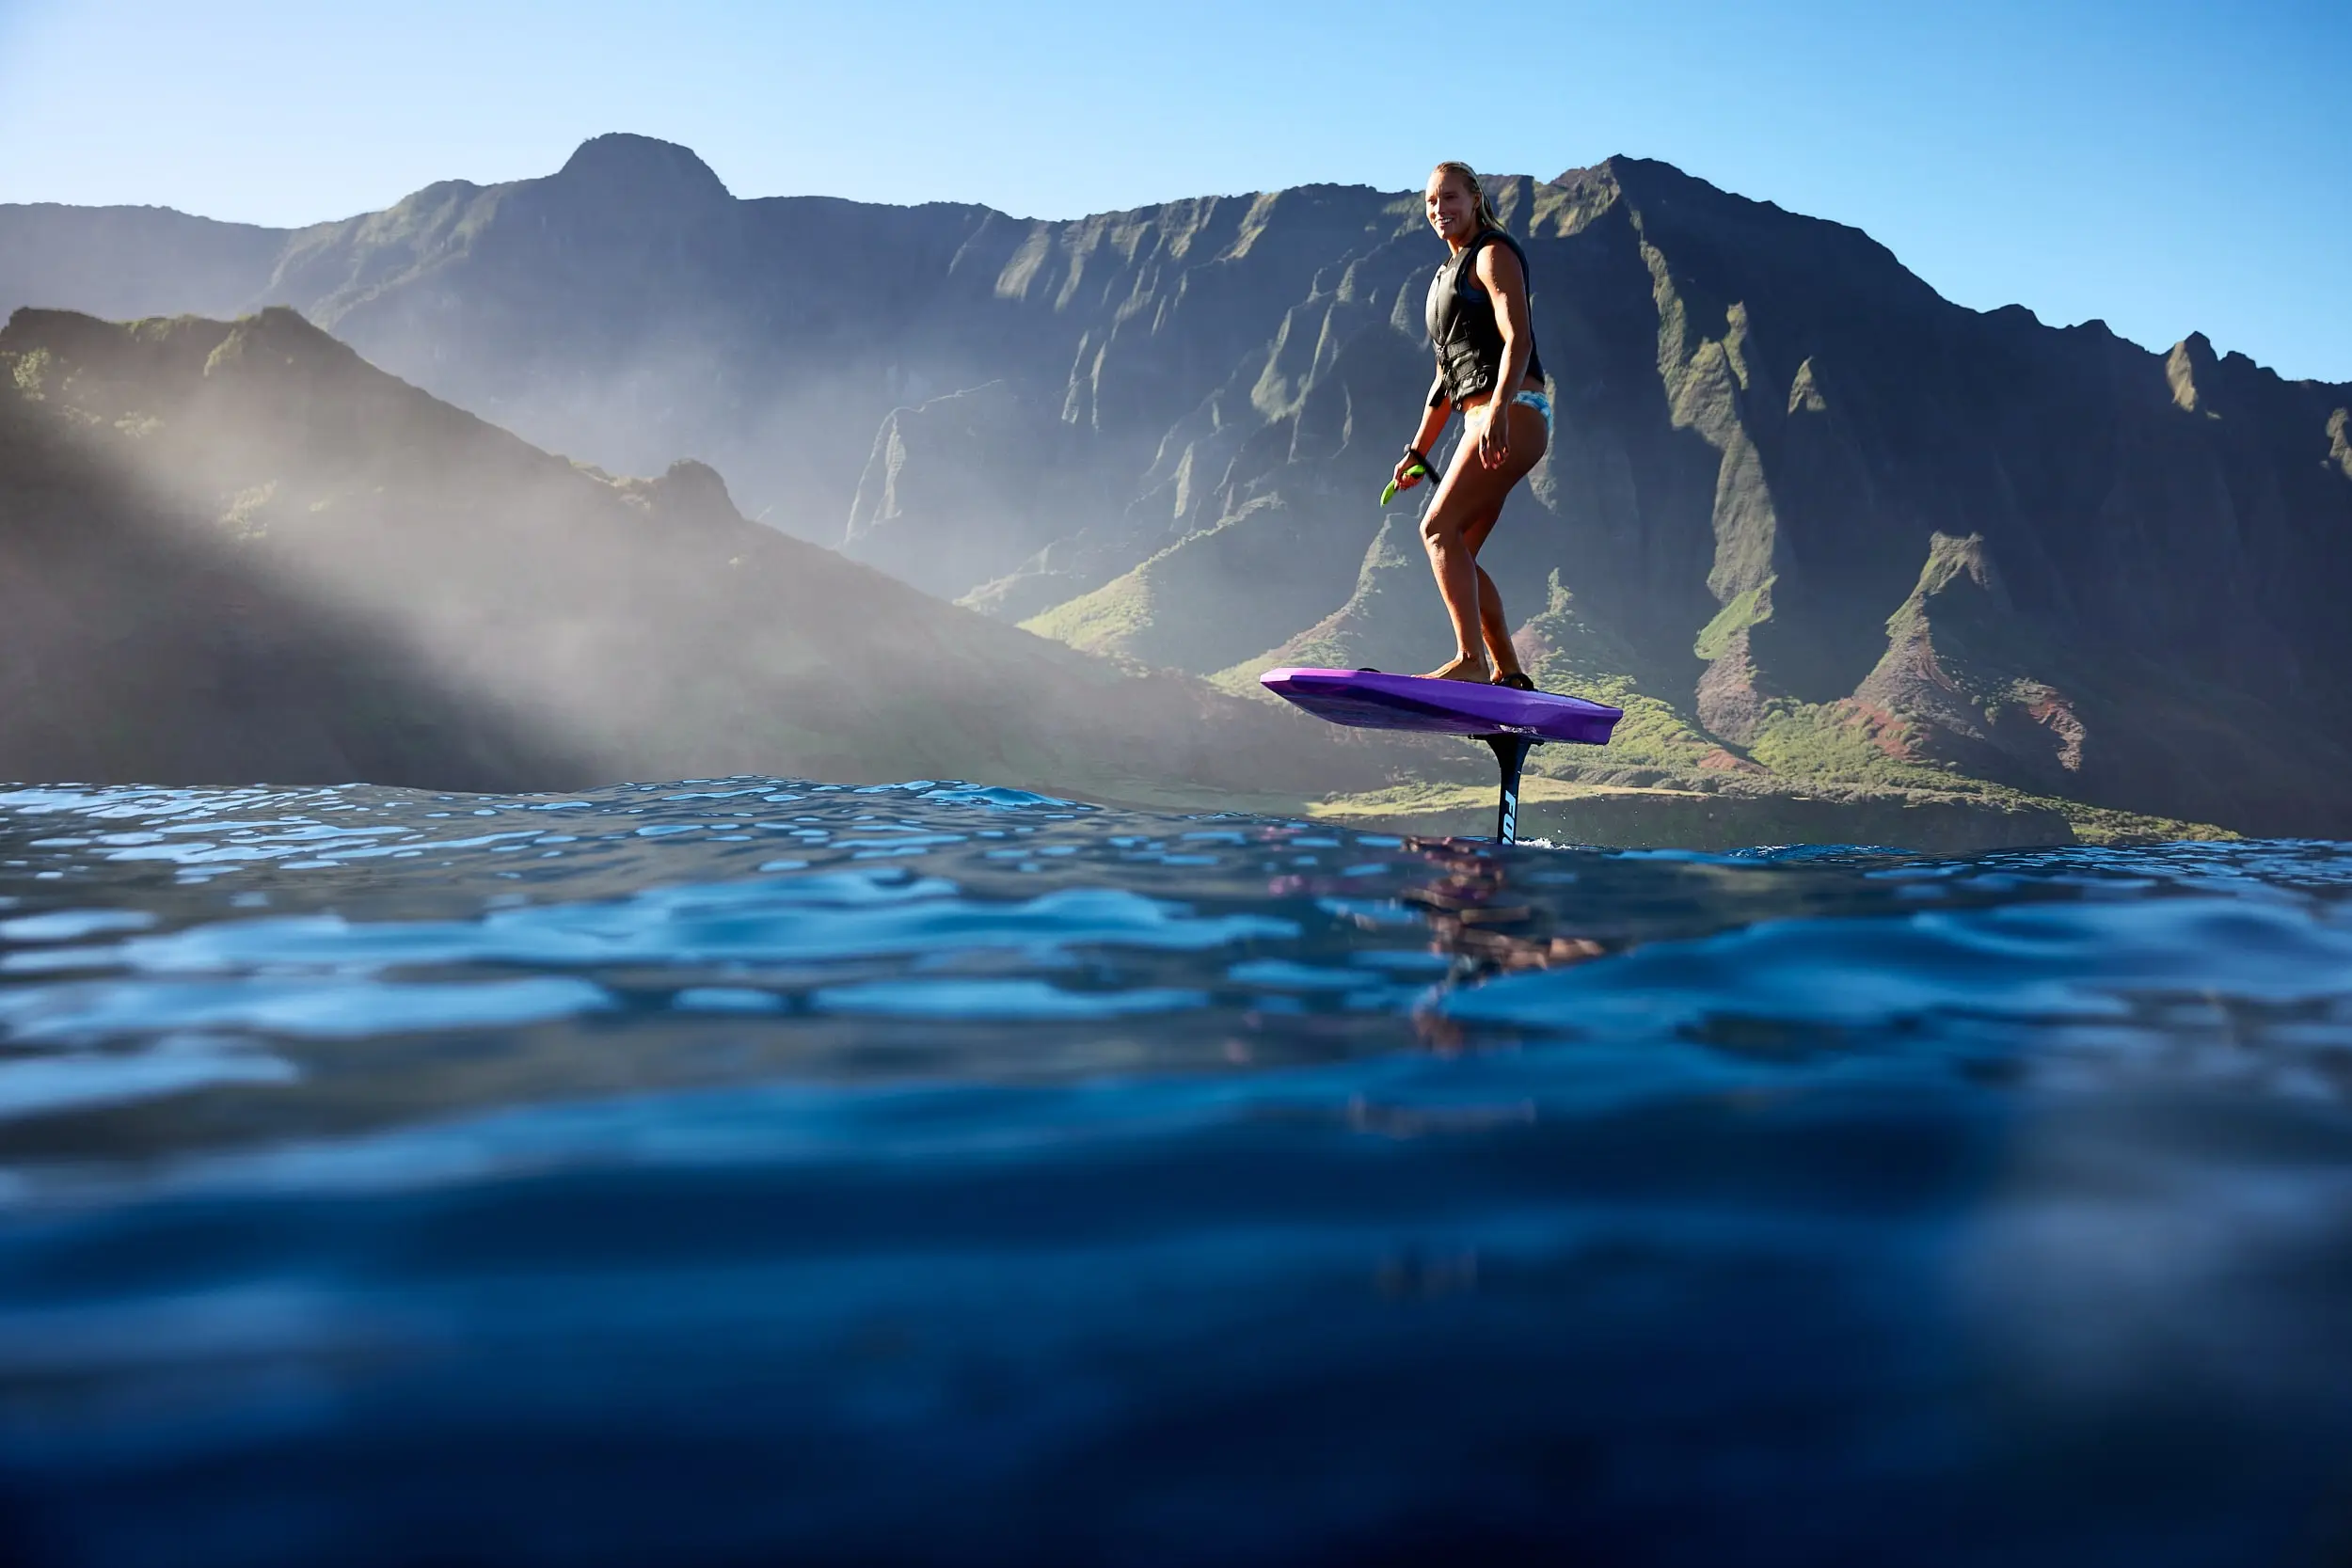 A profile shot of a female rider carving on the original FOIL board. The woman is smiling and moving through calm waters. Idyllic mountains are displayed in the background.